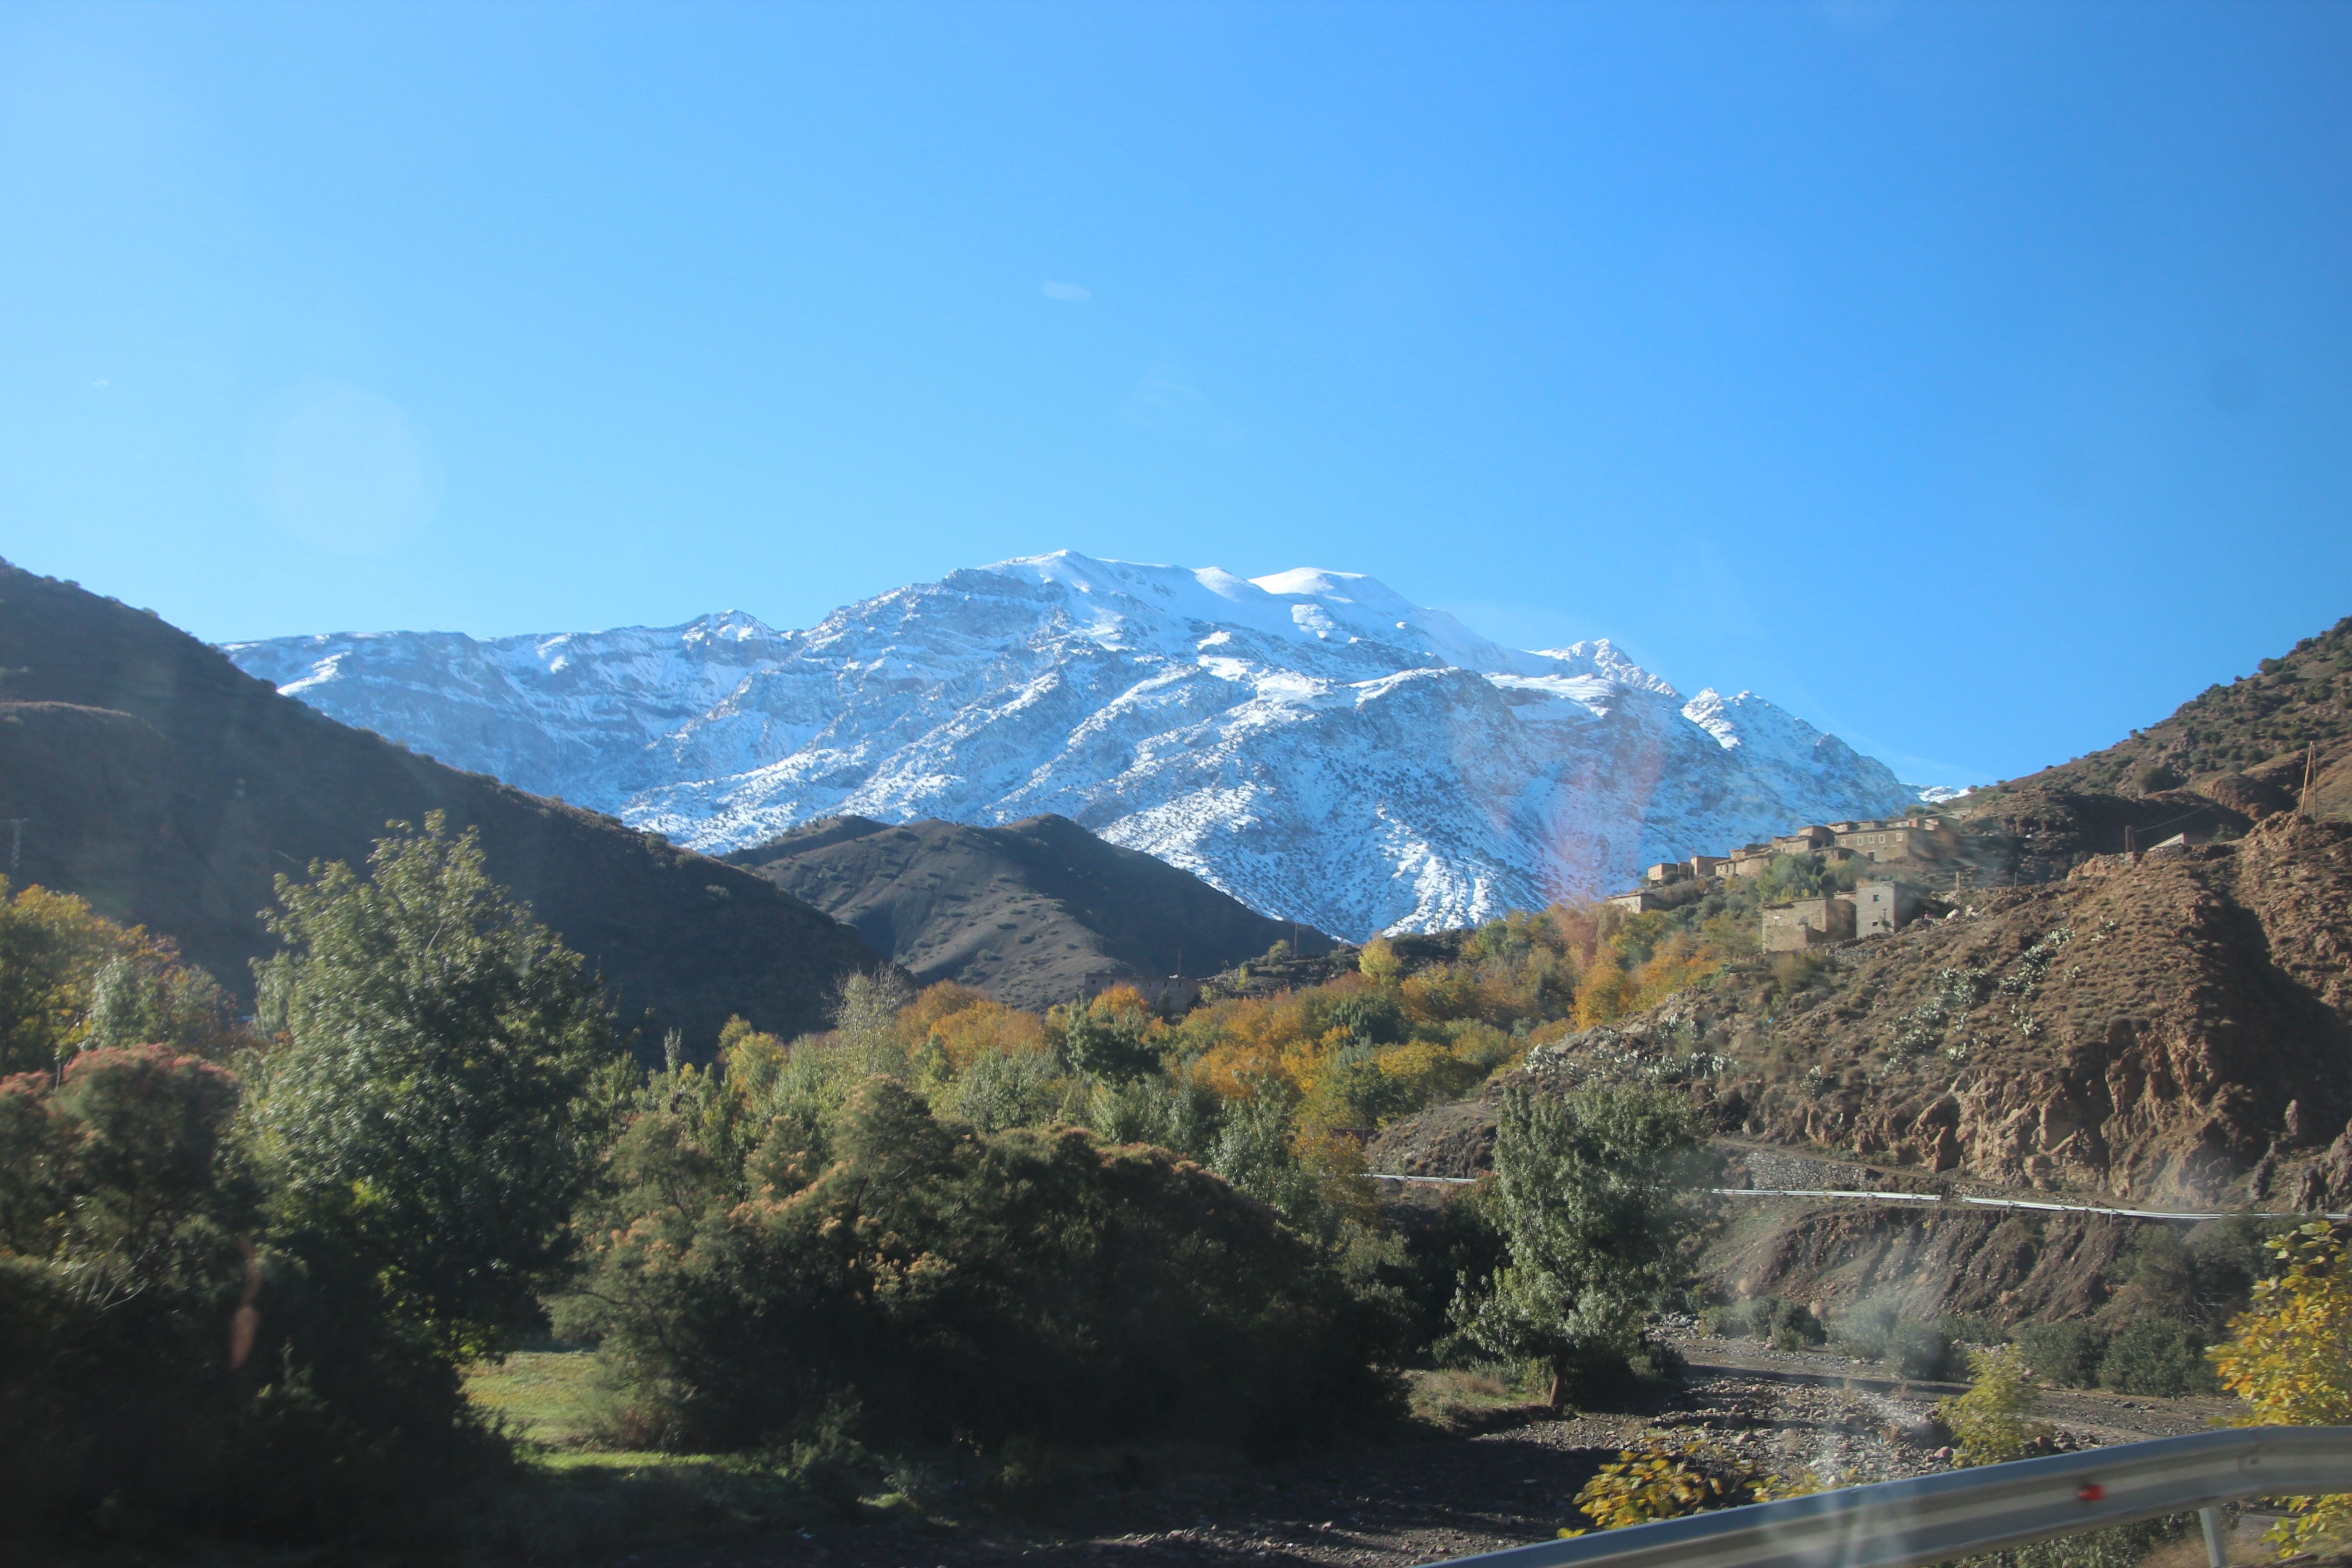 Crossing the Atlas Mountains